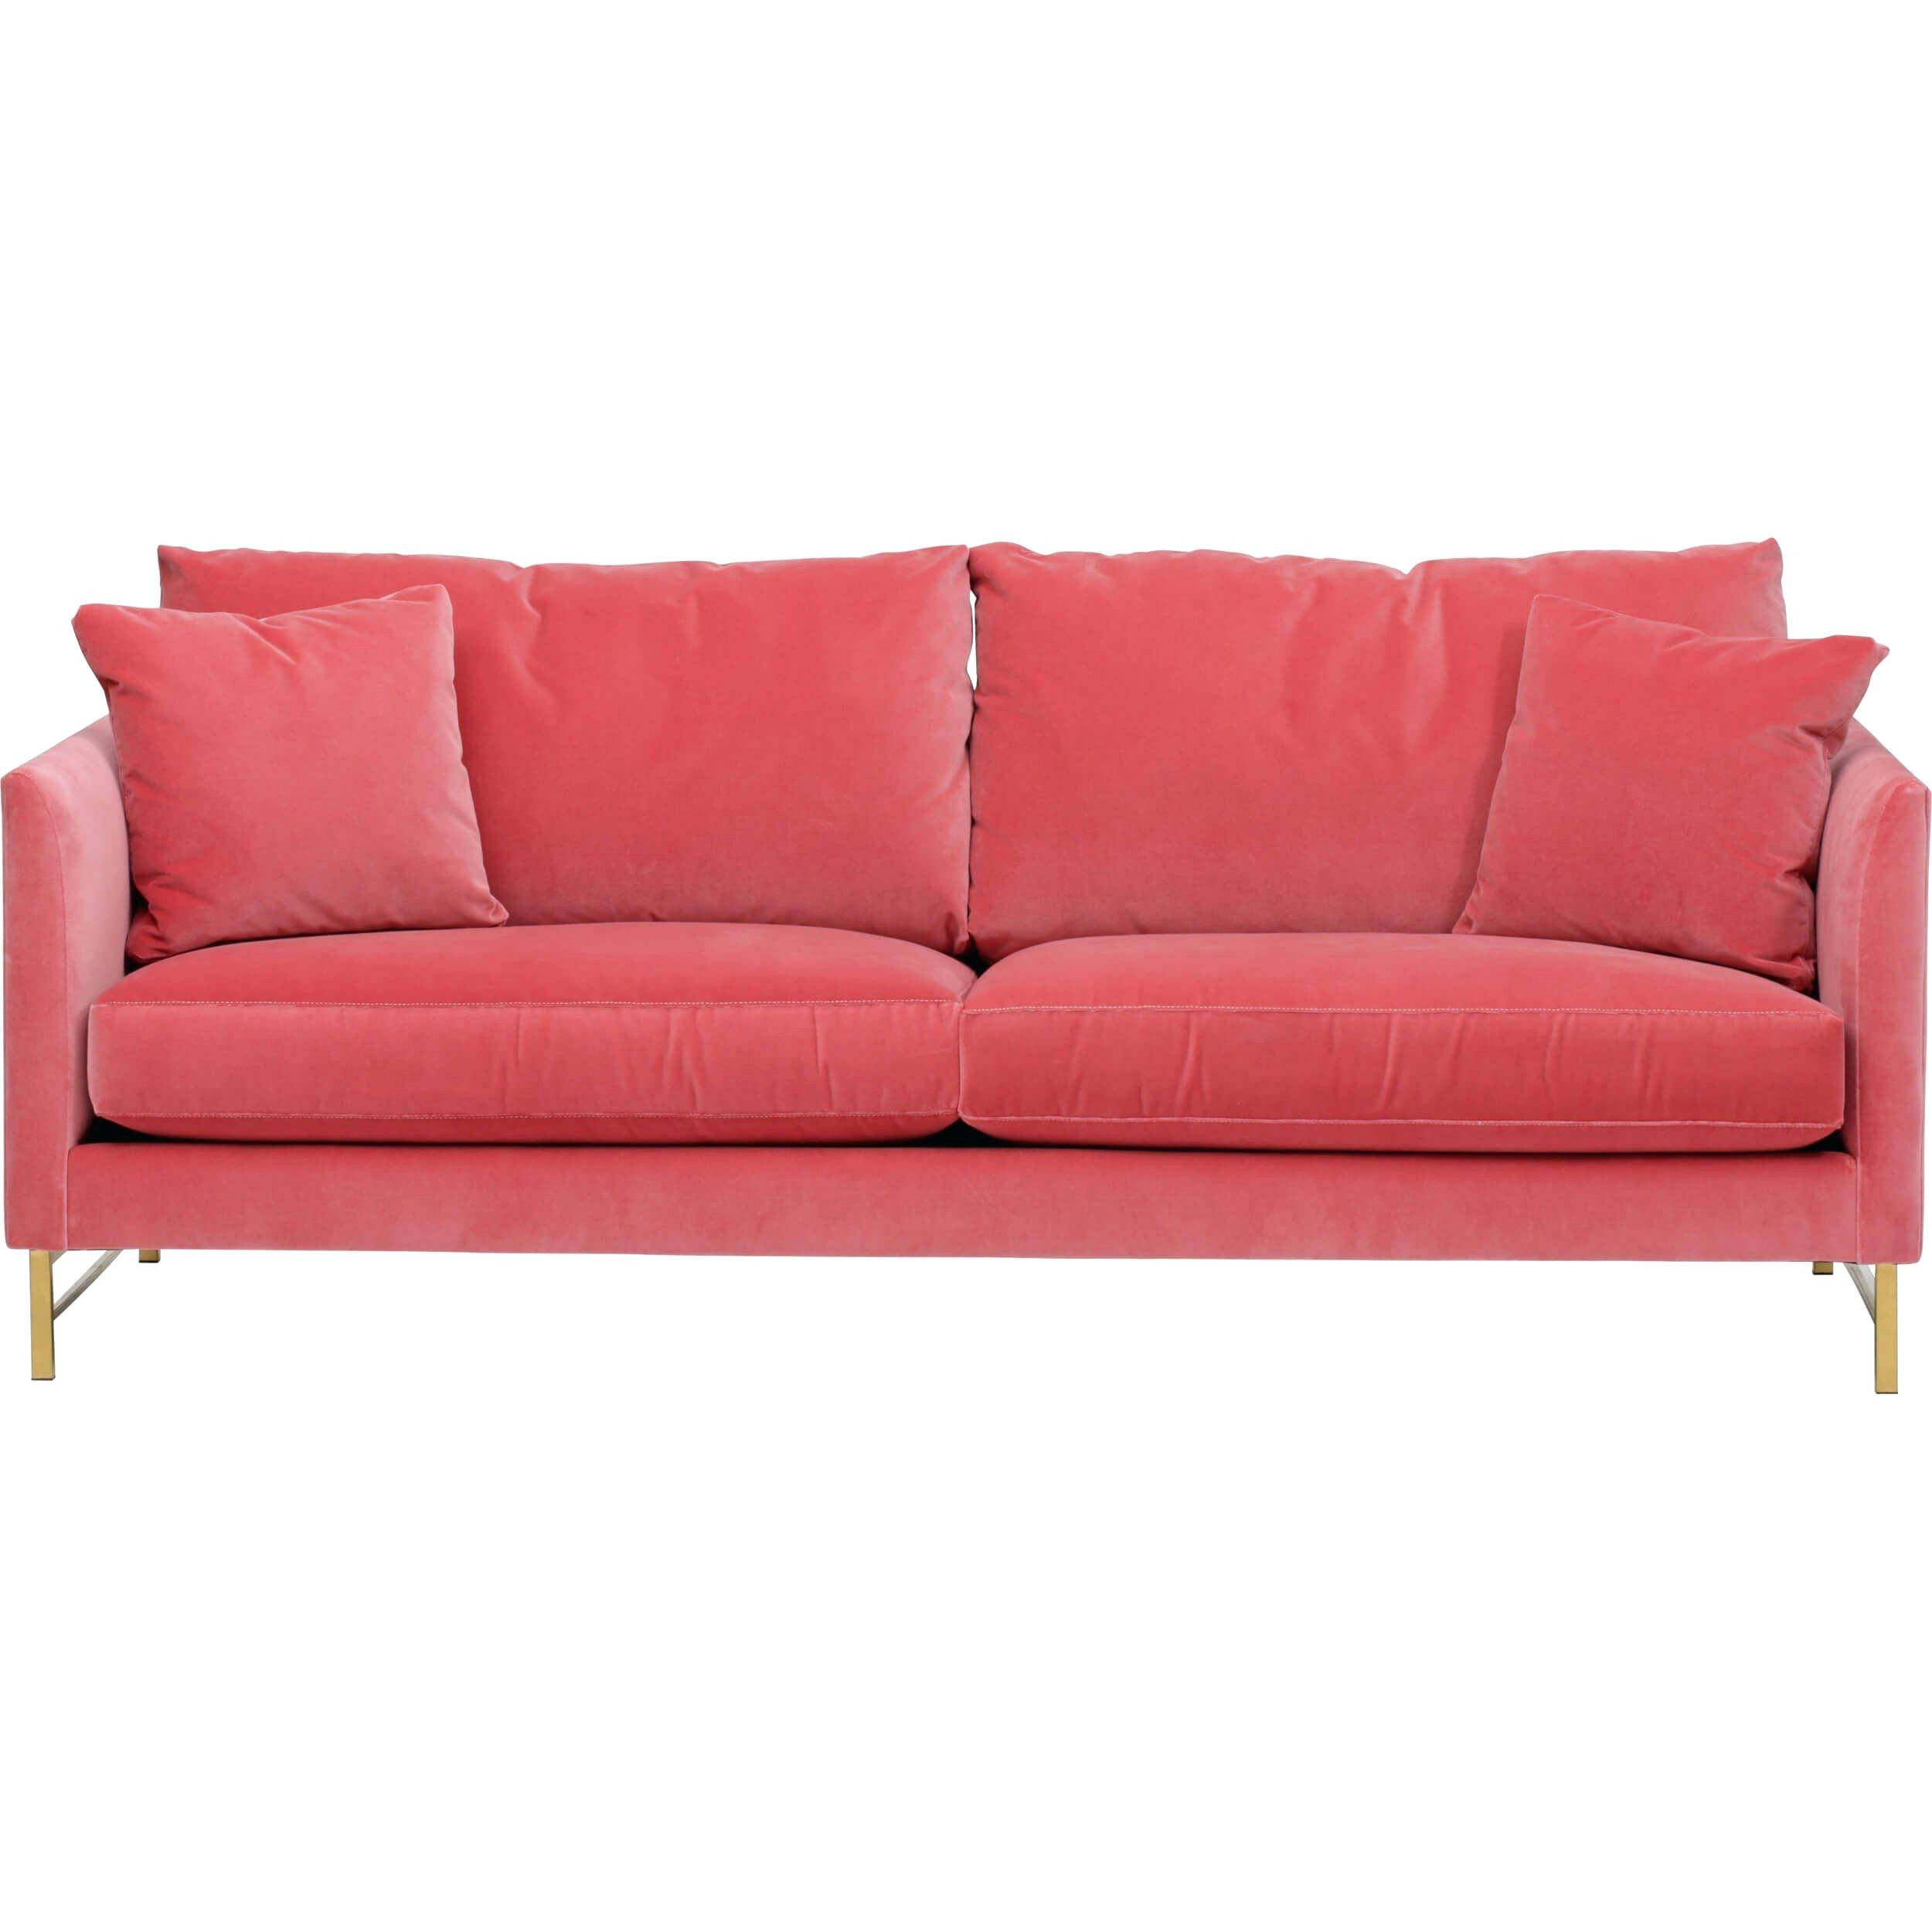 Red Sofa Literary Lovely Red Sofa Gray Set Beige Tan Interior Grey Setup Couches Of Red Sofa Literary 